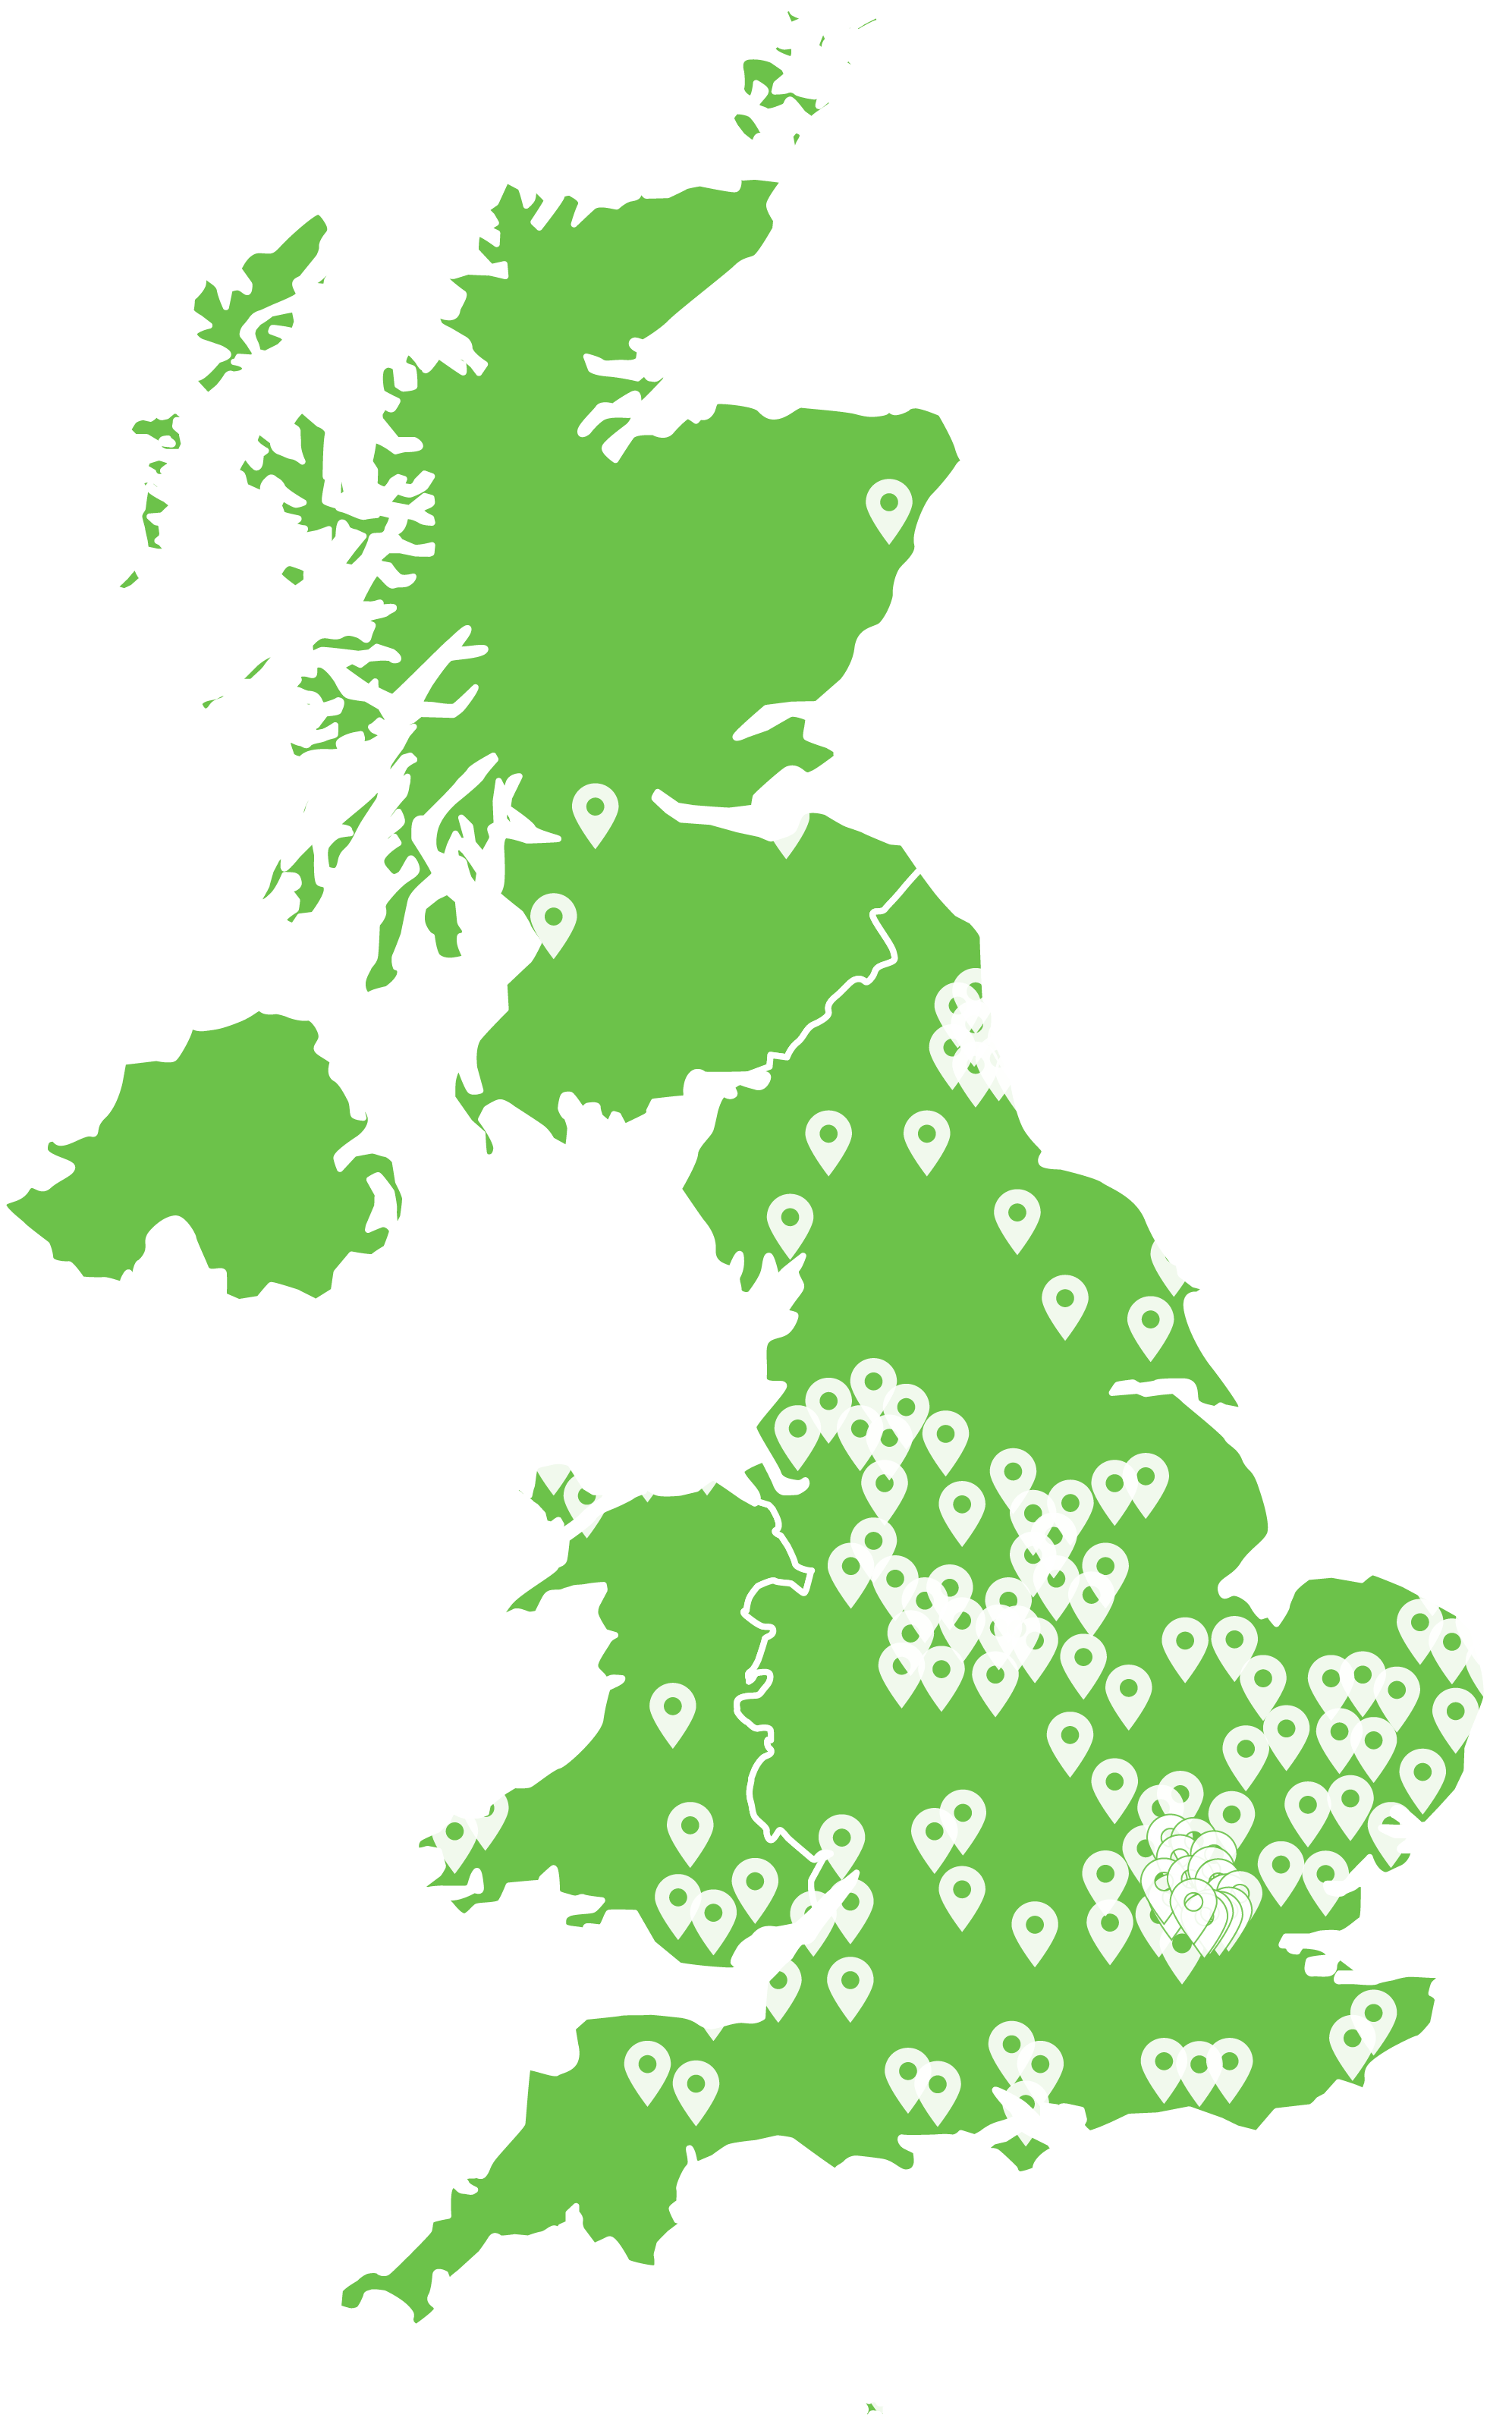 UK map showing locations where you can pay to park using PayByPhone.